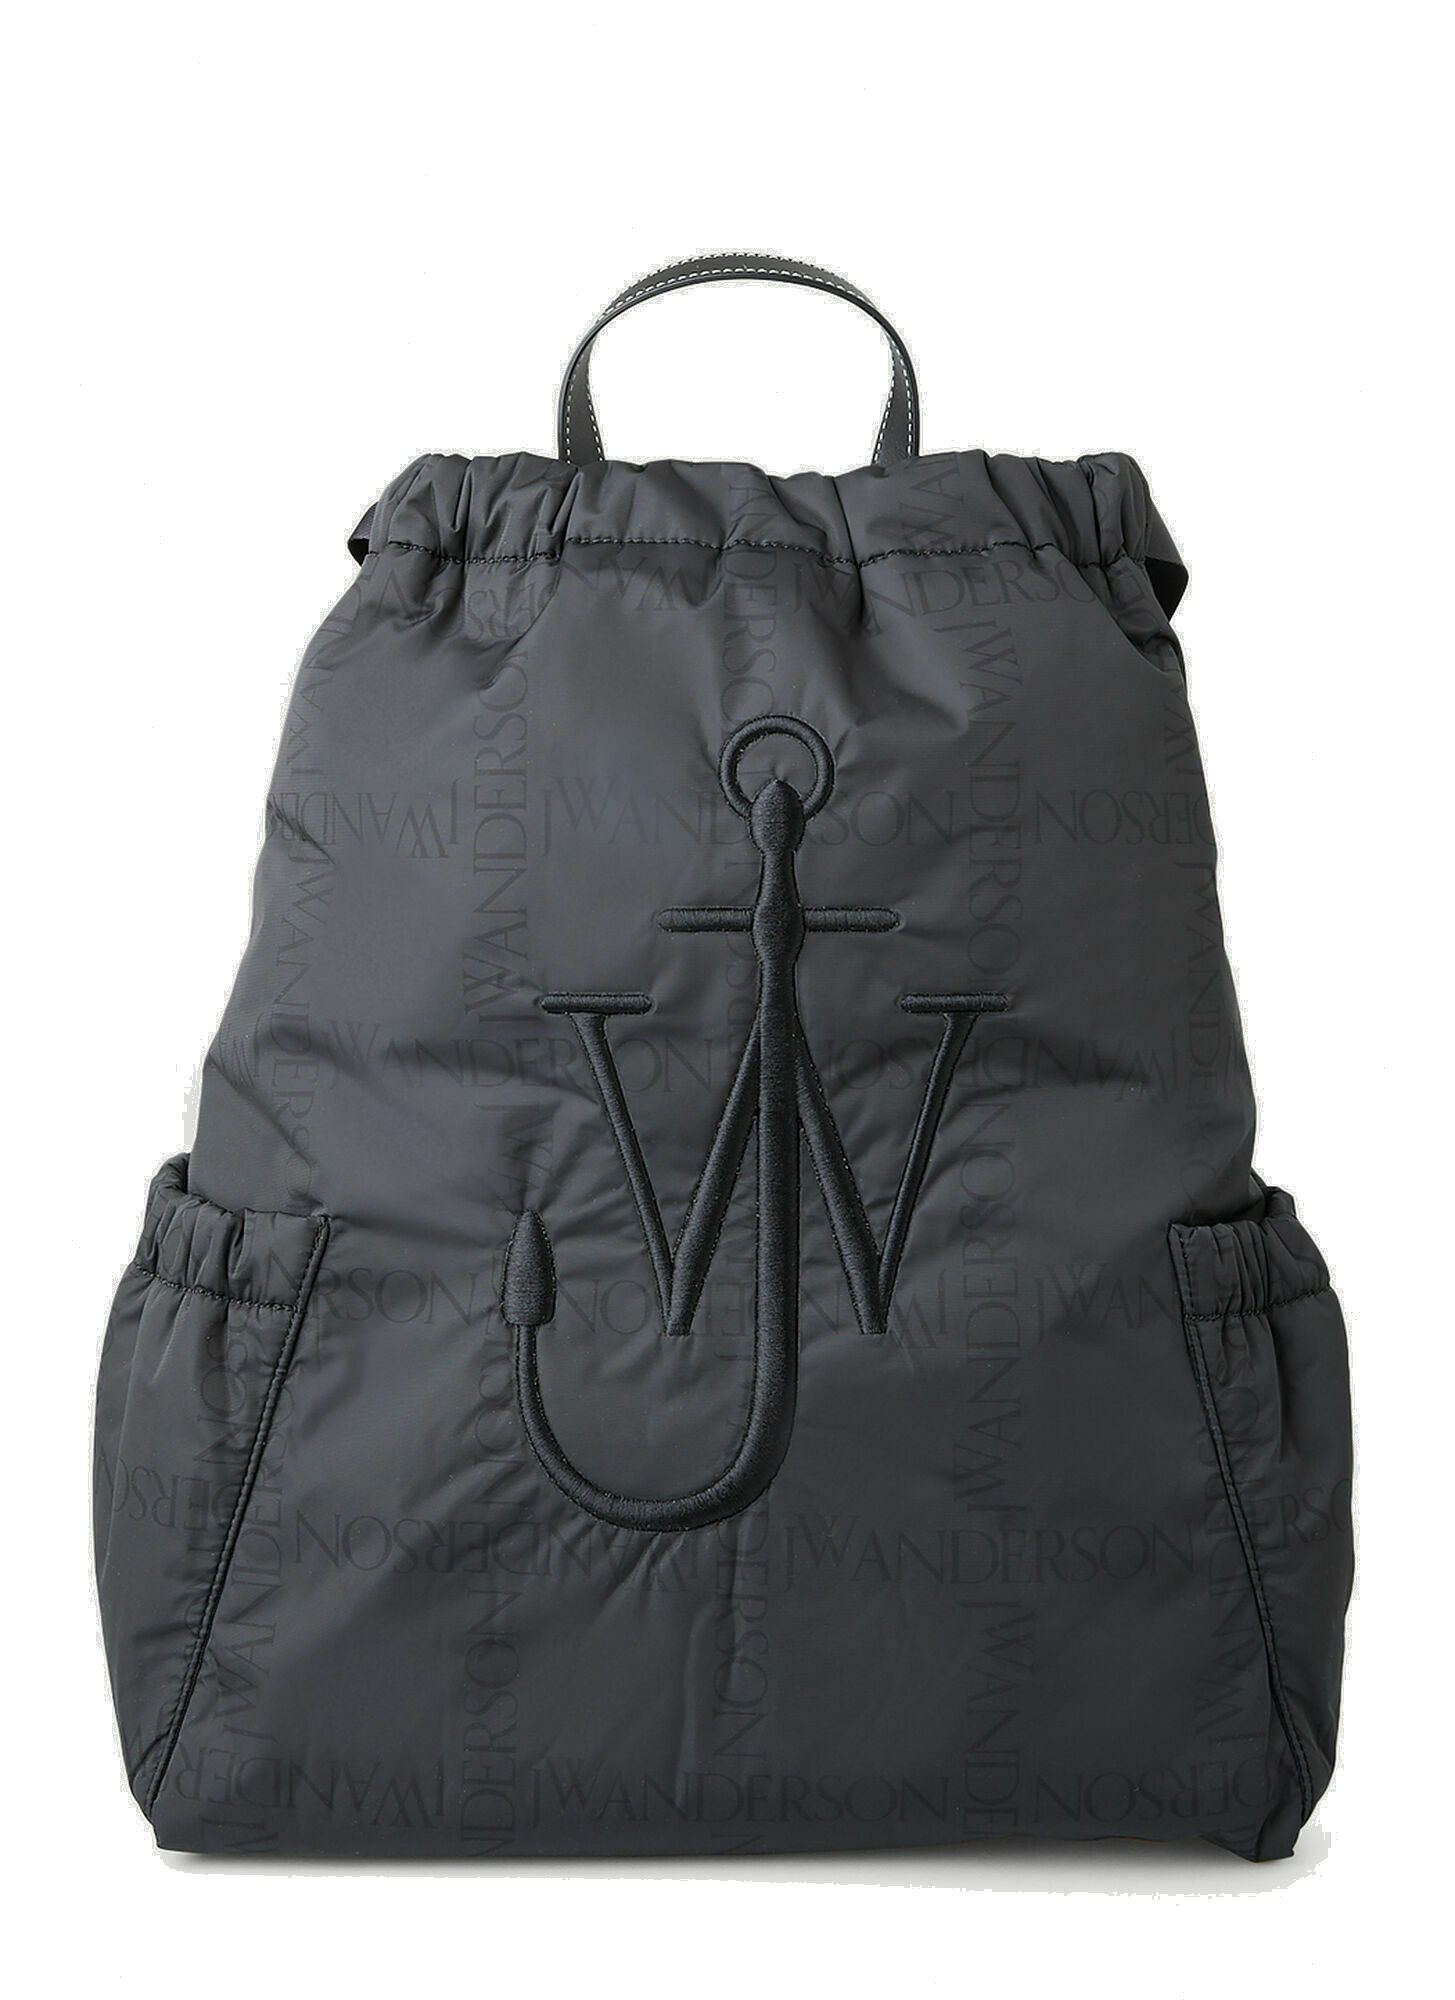 Anchor Backpack in Black JW Anderson